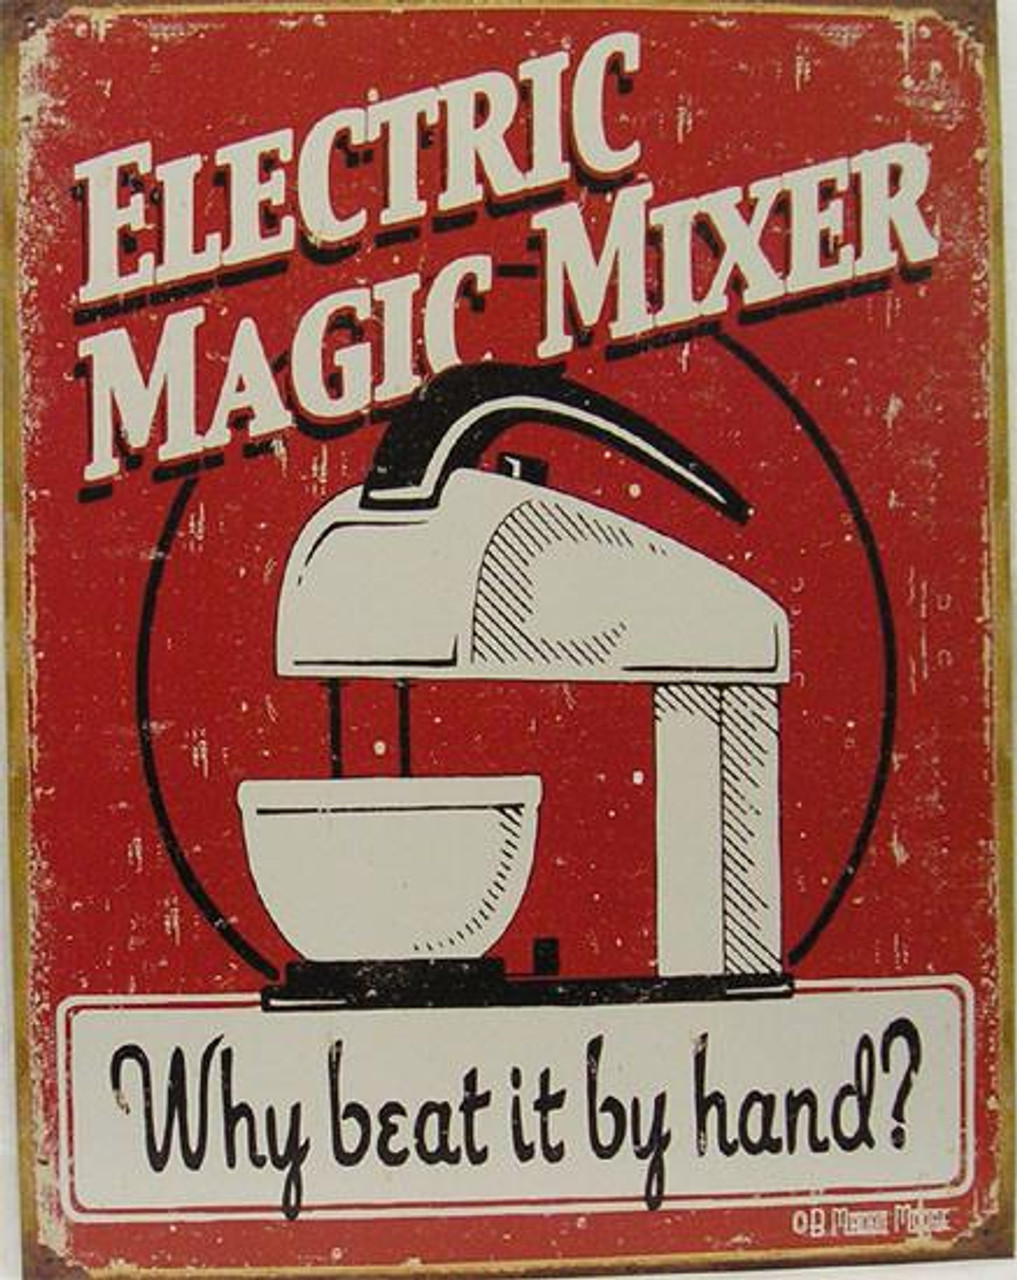 Electric Magic Mixer-Why beat it by hand? (DISC) - American